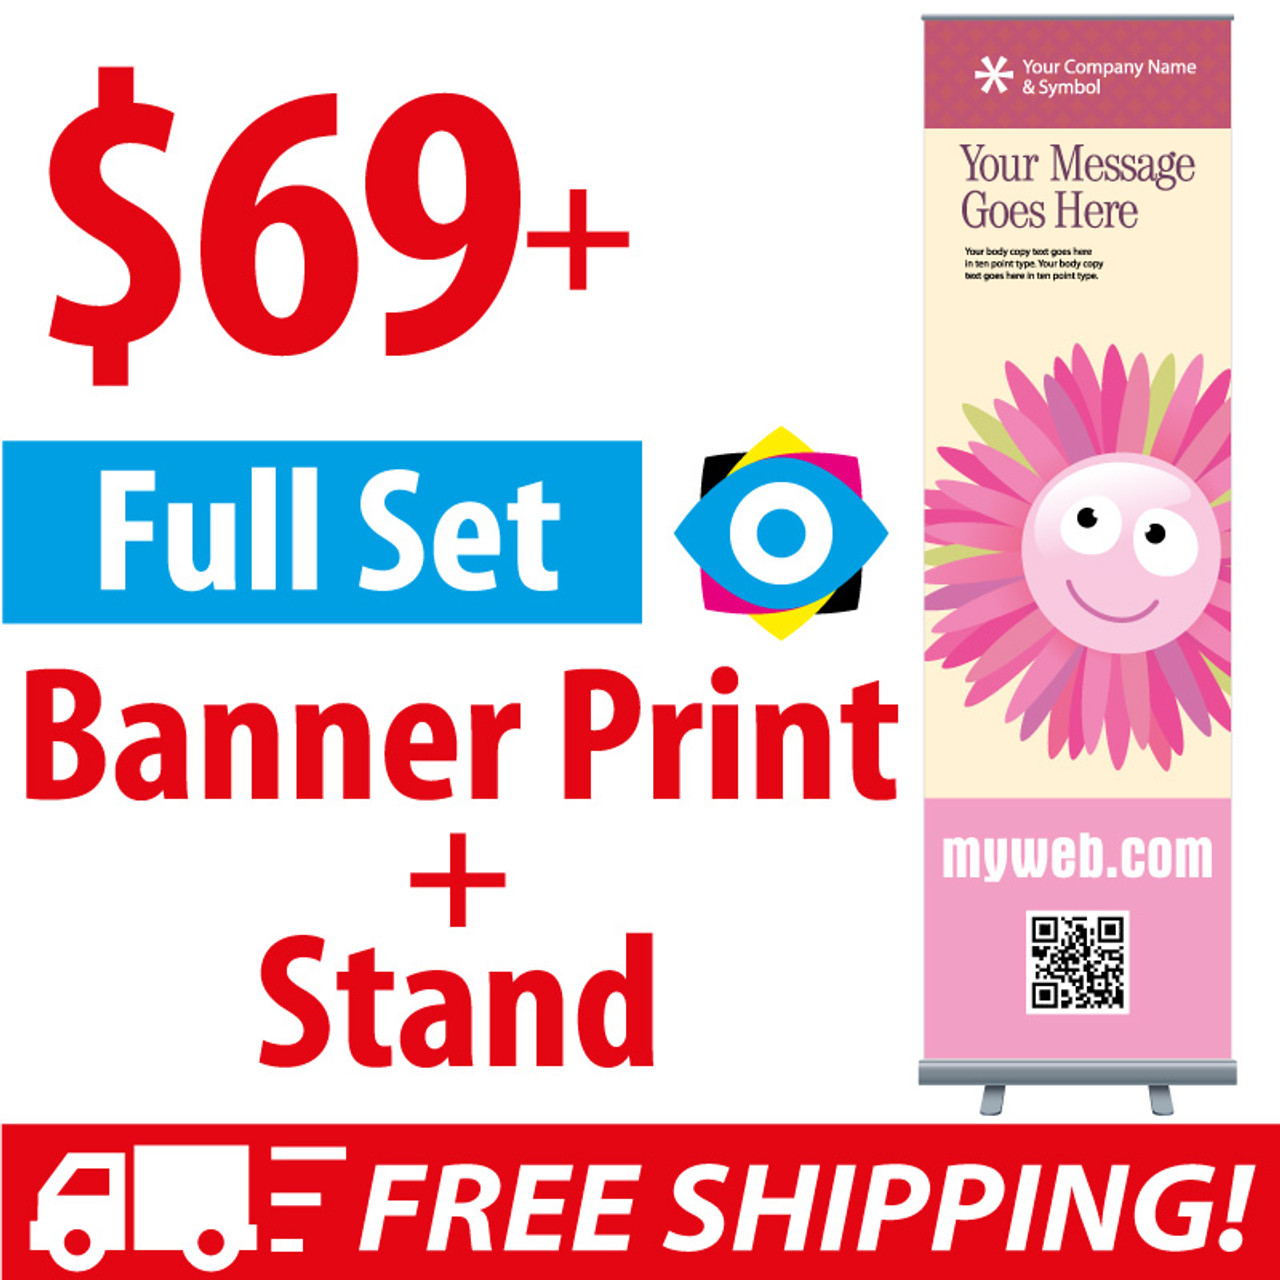 Affordable Custom Roll Up Banner Stands